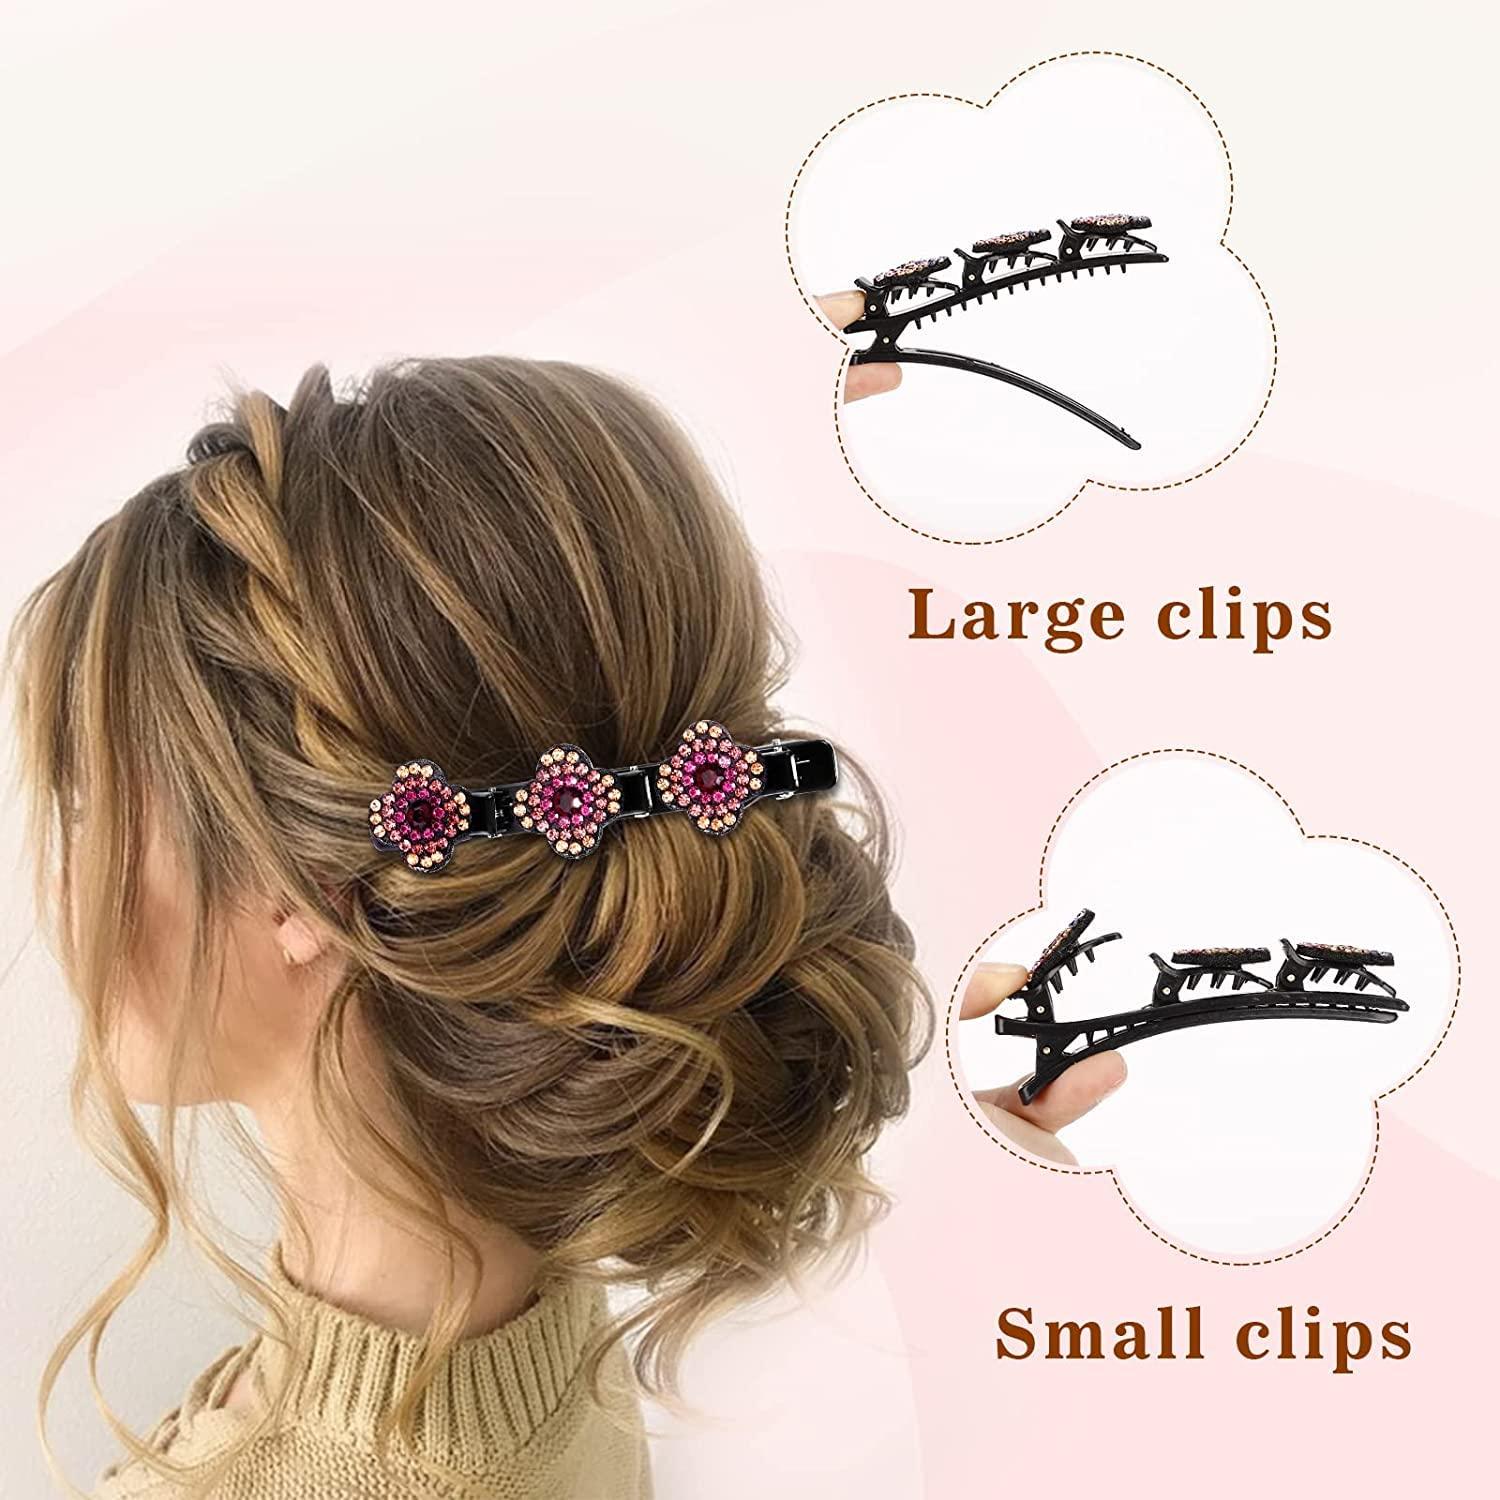 Pompotops Braided Hair Clips with 3 Small Clips for Women Girls Cute Pearl  Braided Hair Barrettes Hair Accessories